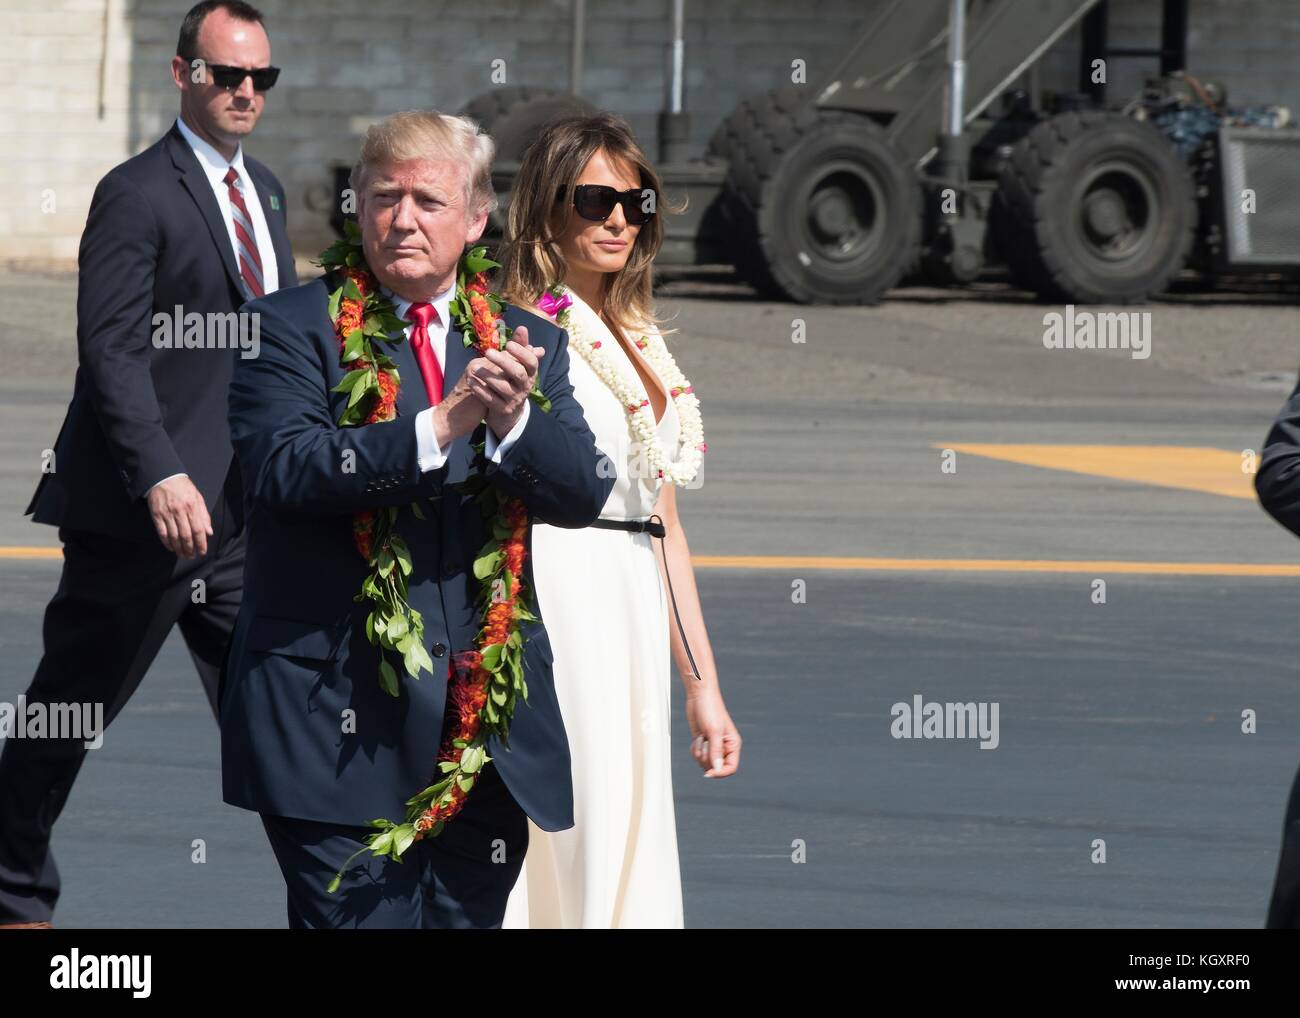 U.S. President Donald Trump (left) and U.S. First Lady Melania Trump arrive at the Joint Base Pearl Harbor-Hickam November 3, 2017 in Pearl Harbor, Hawaii.   (photo by Corwin Colbert via Planetpix) Stock Photo